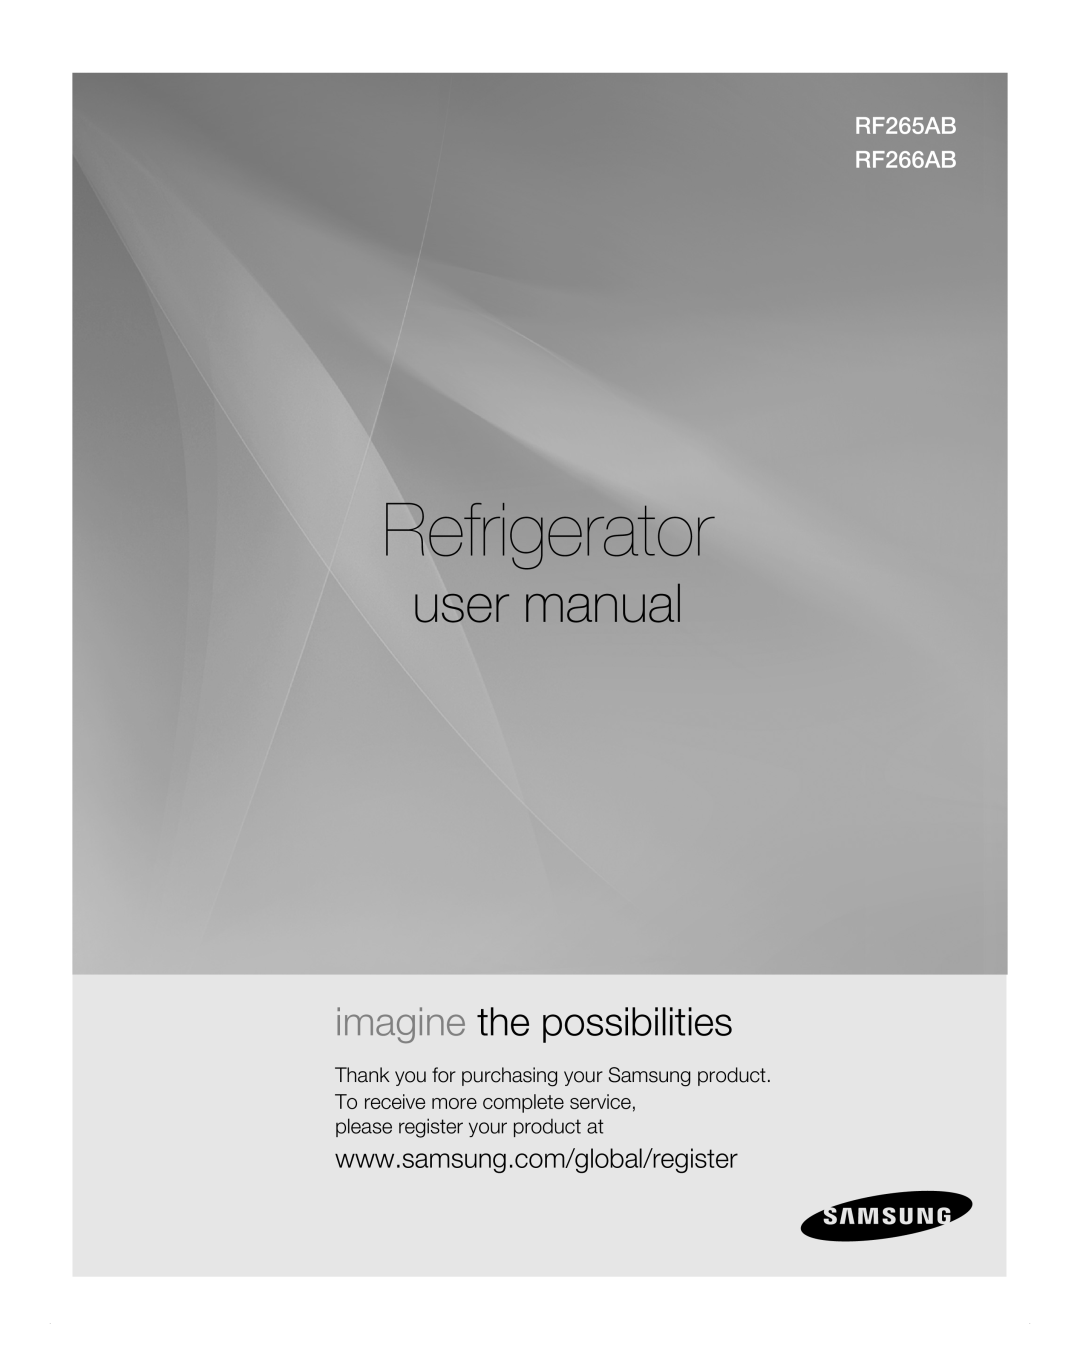 Samsung user manual please register your product at, Refrigerator, imagine the possibilities, RF265AB RF266AB 